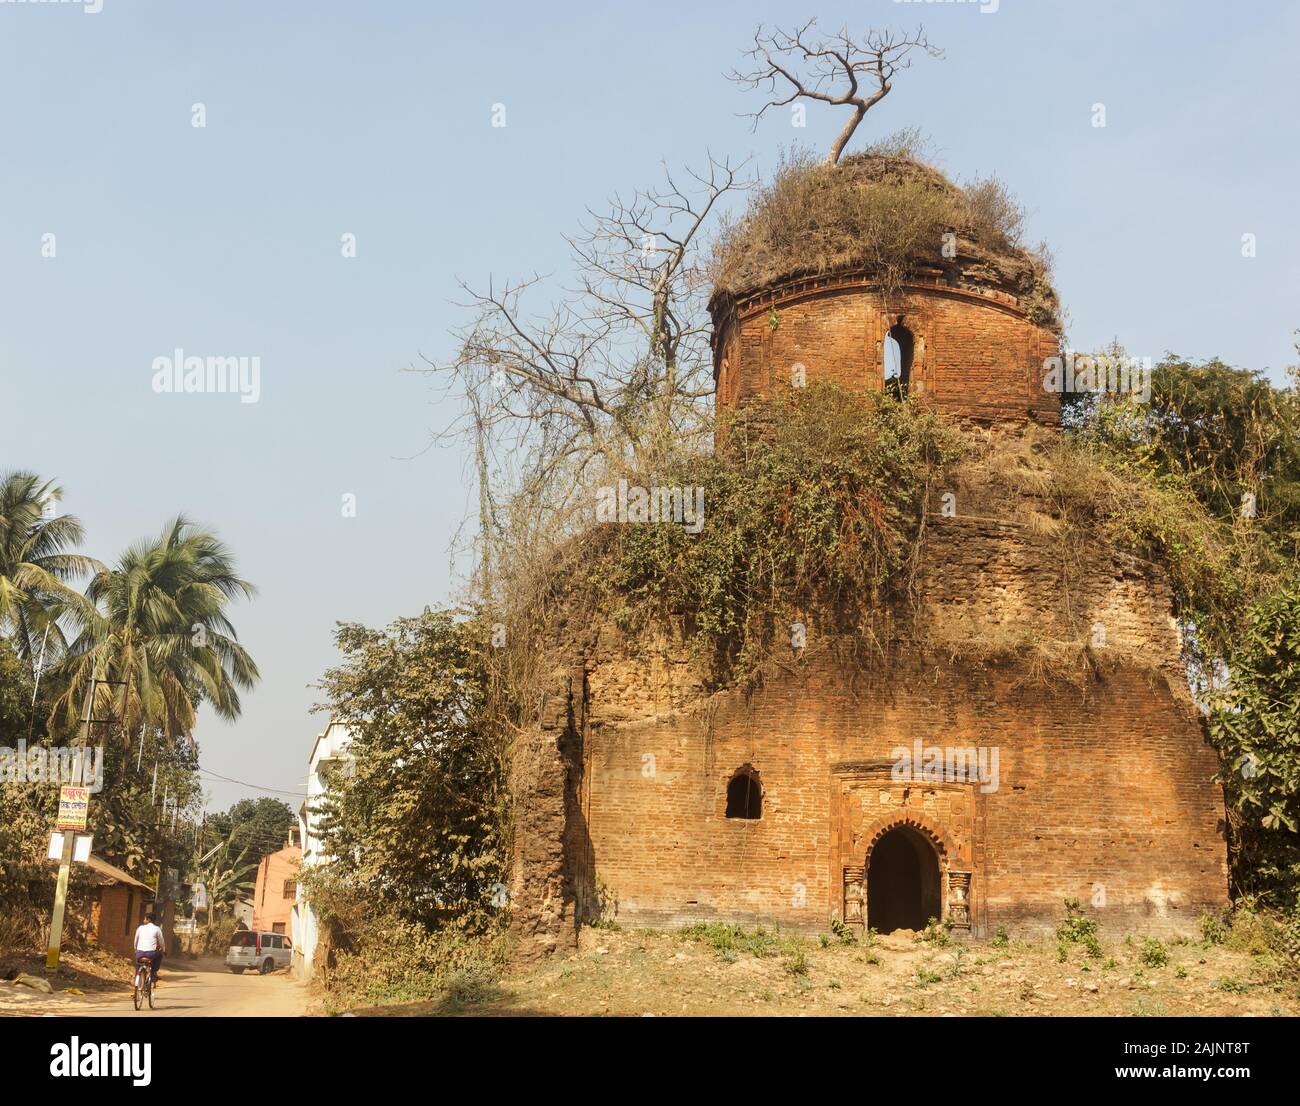 Bishnupur, West Bengal, India - February 6, 2018: An overgrown ruin of an old brick temple built by the Malla dynasty. Kids cycle on the road that goe Stock Photo